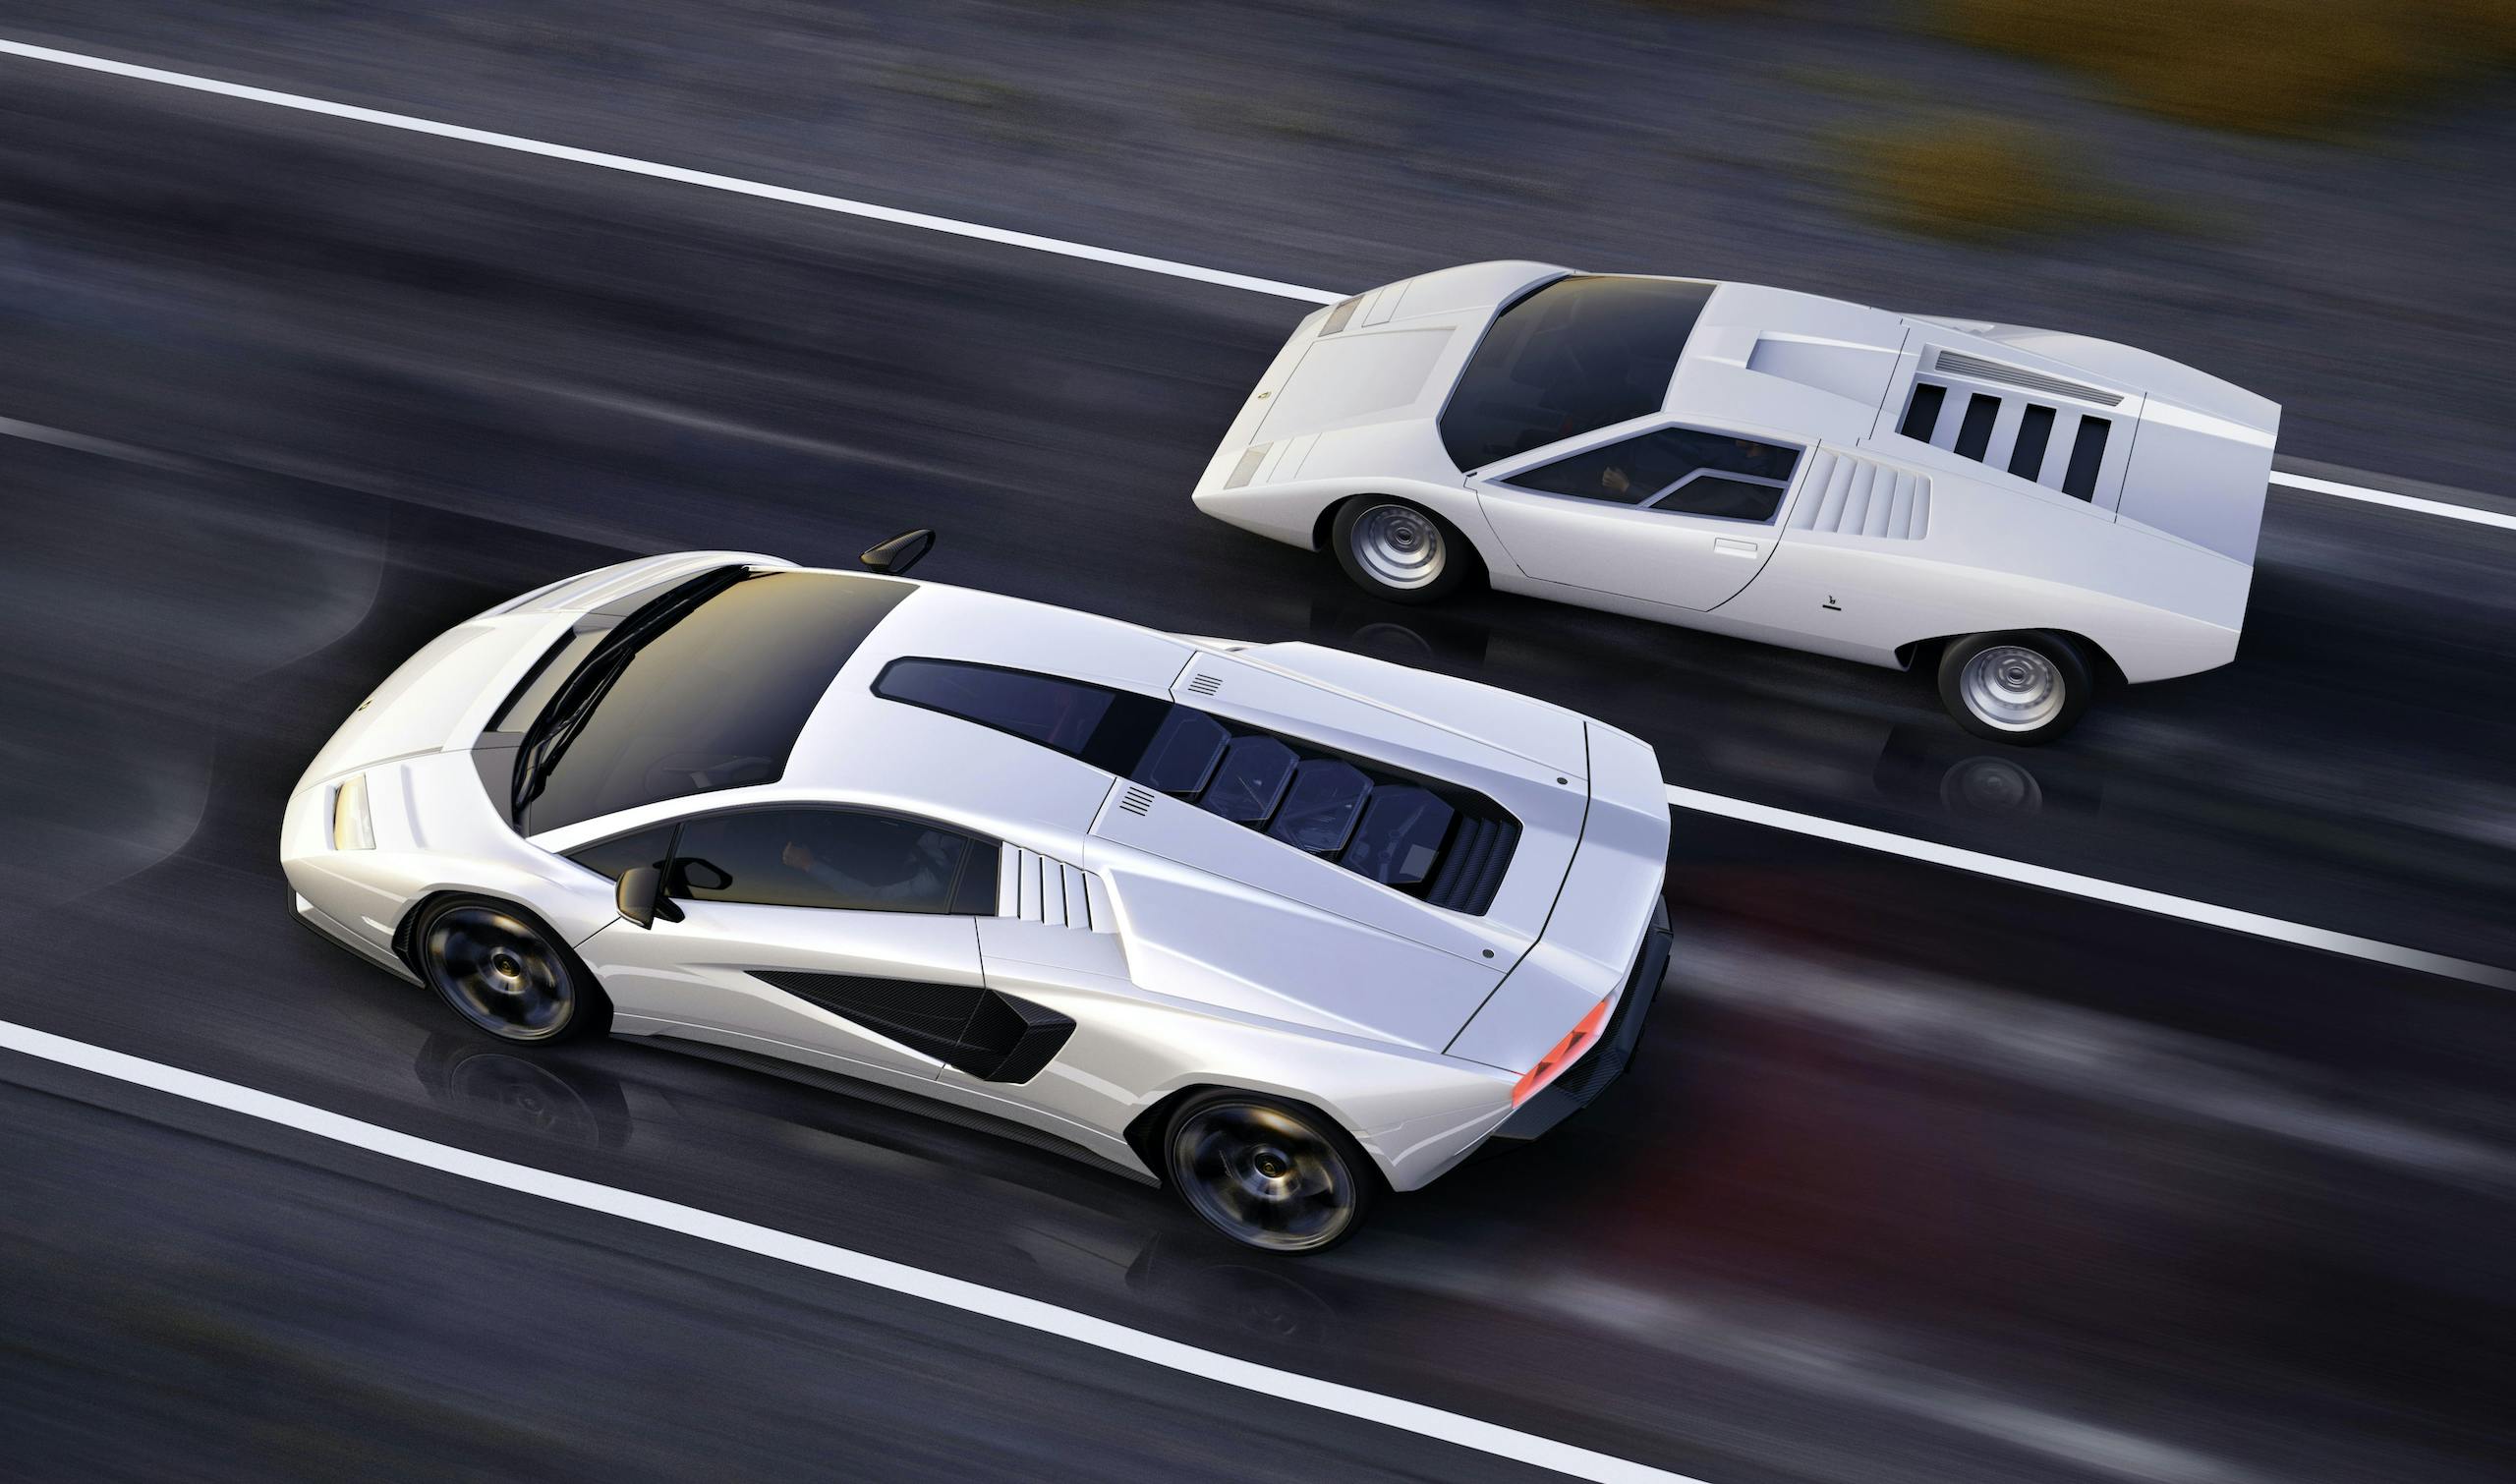 Countach LPI 800 old and new